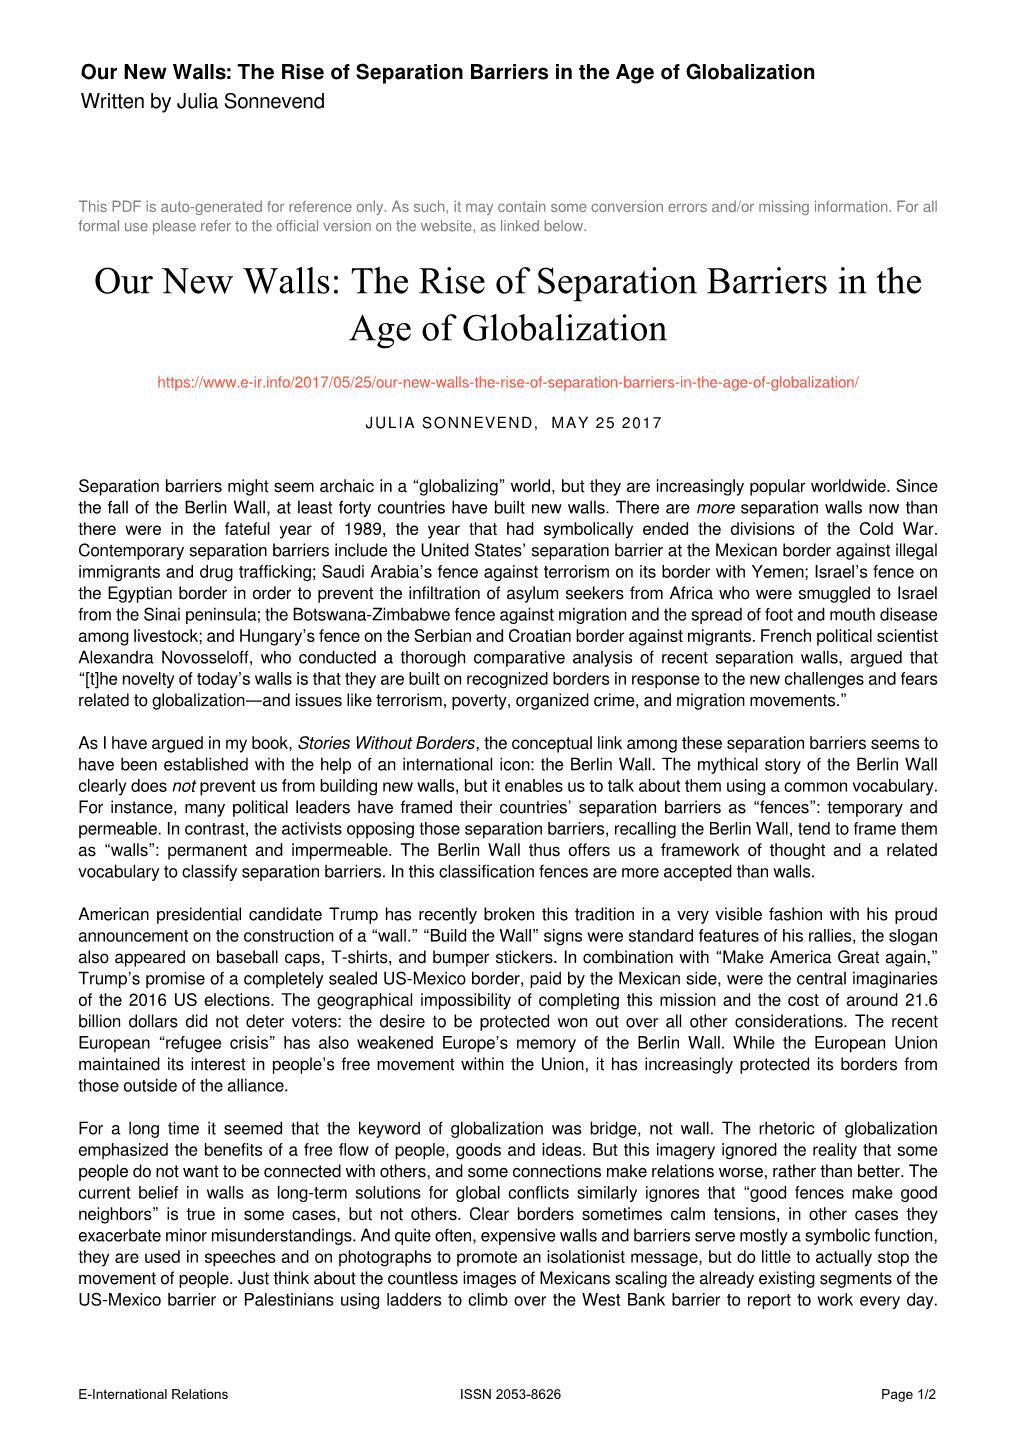 The Rise of Separation Barriers in the Age of Globalization Written by Julia Sonnevend